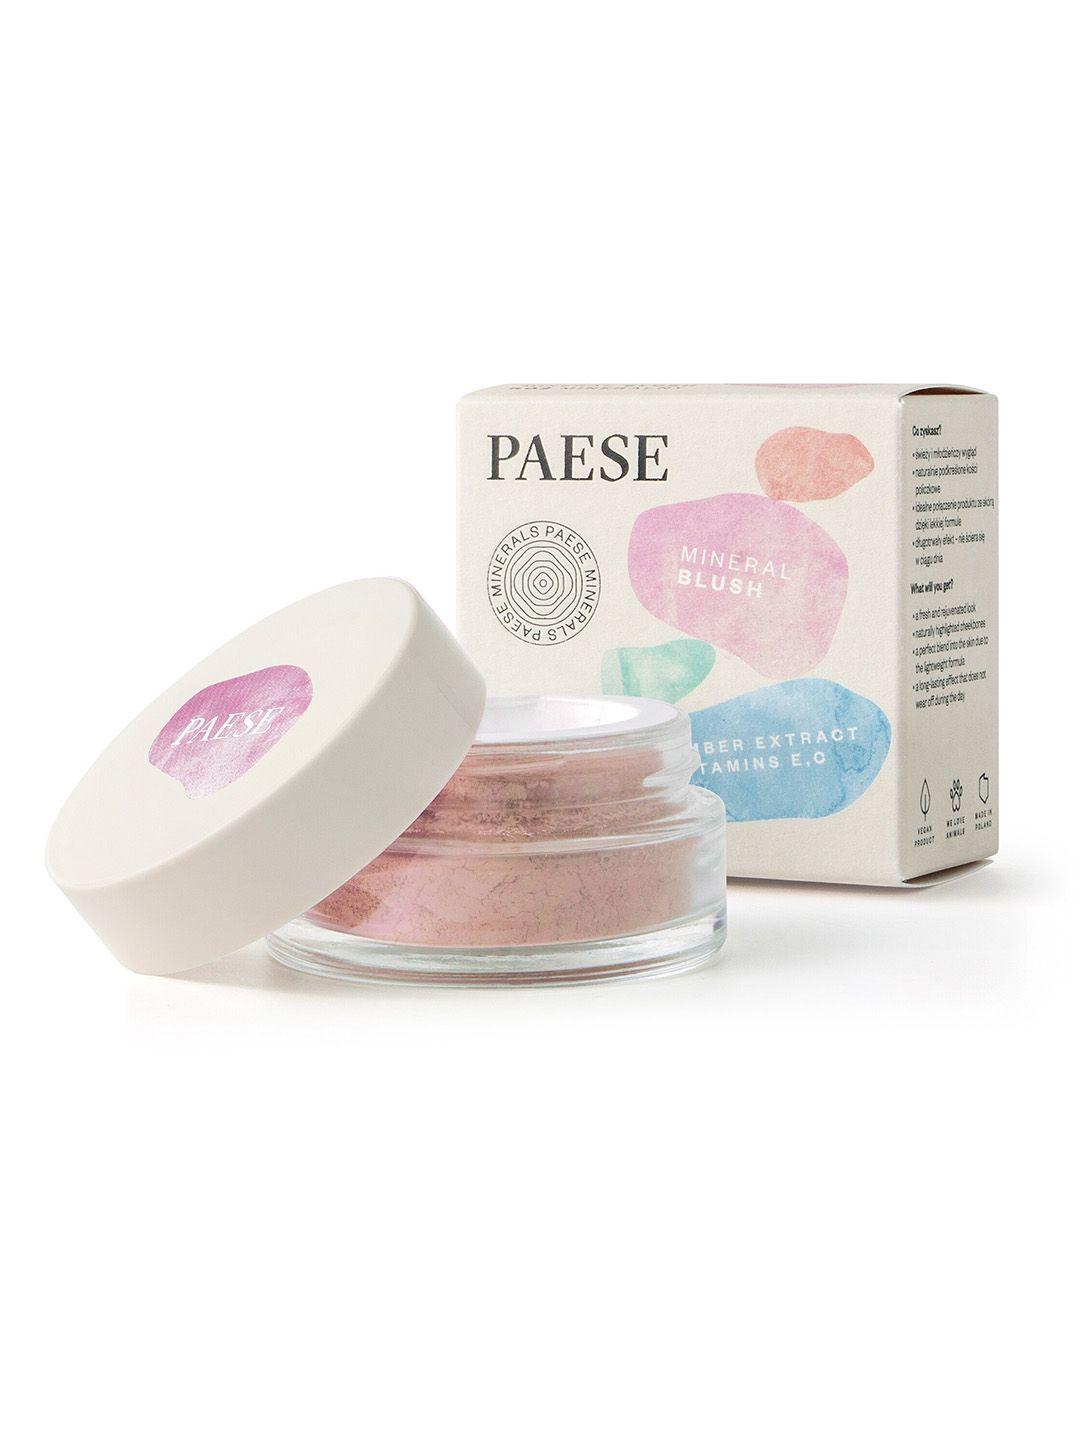 paese-cosmetics-mineral-blush-with-amber-extract-&-vitamin-e-and-c-6g---mallow-302c